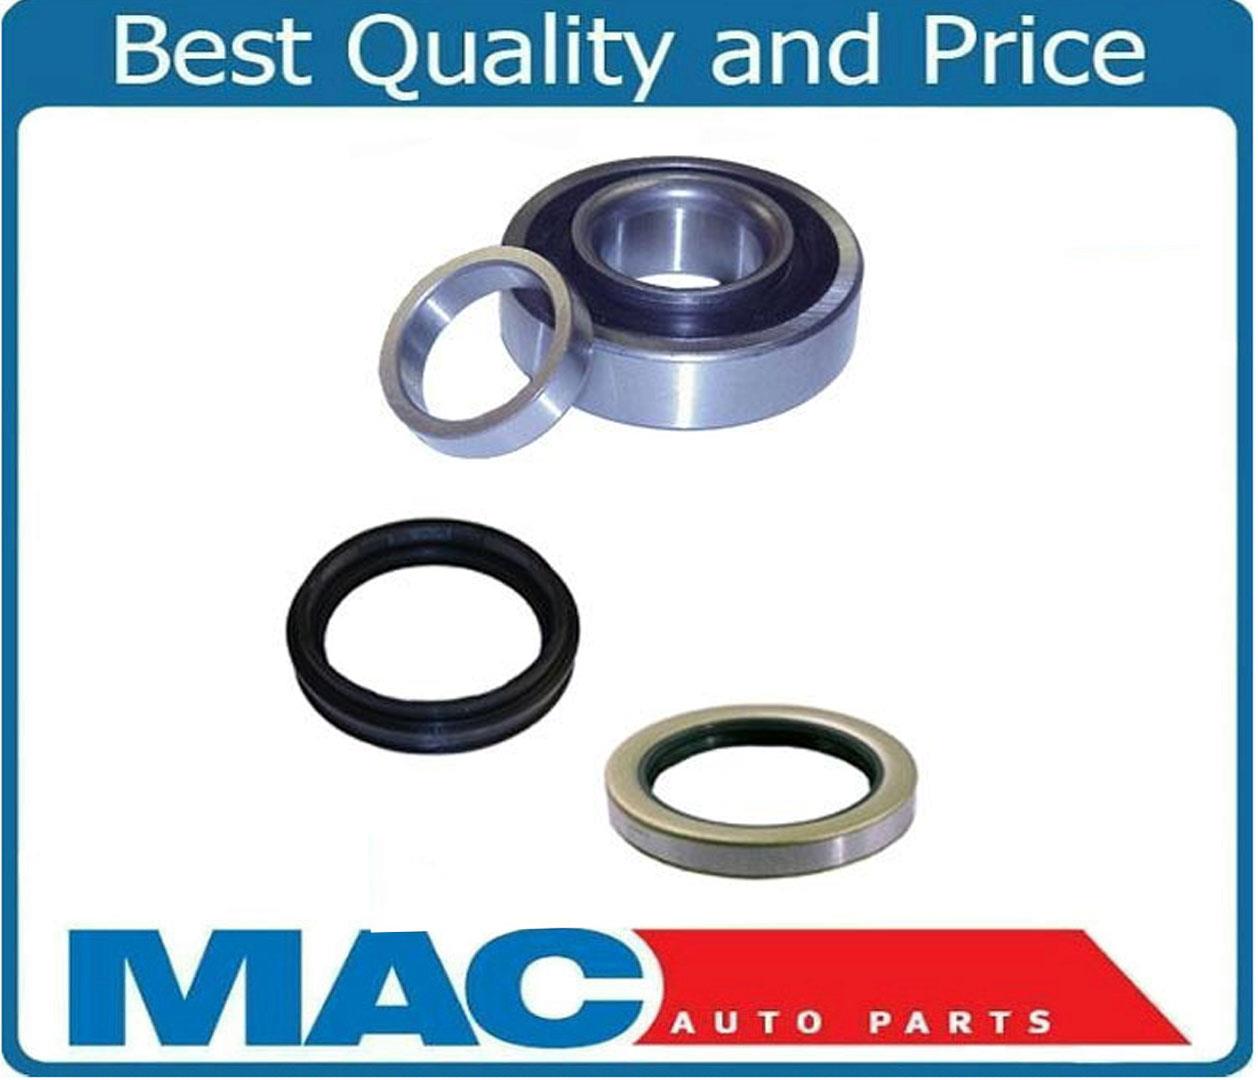 100% New Rear Axle Wheel Bearing With Seals 3pc Kit for Toyota Tundra